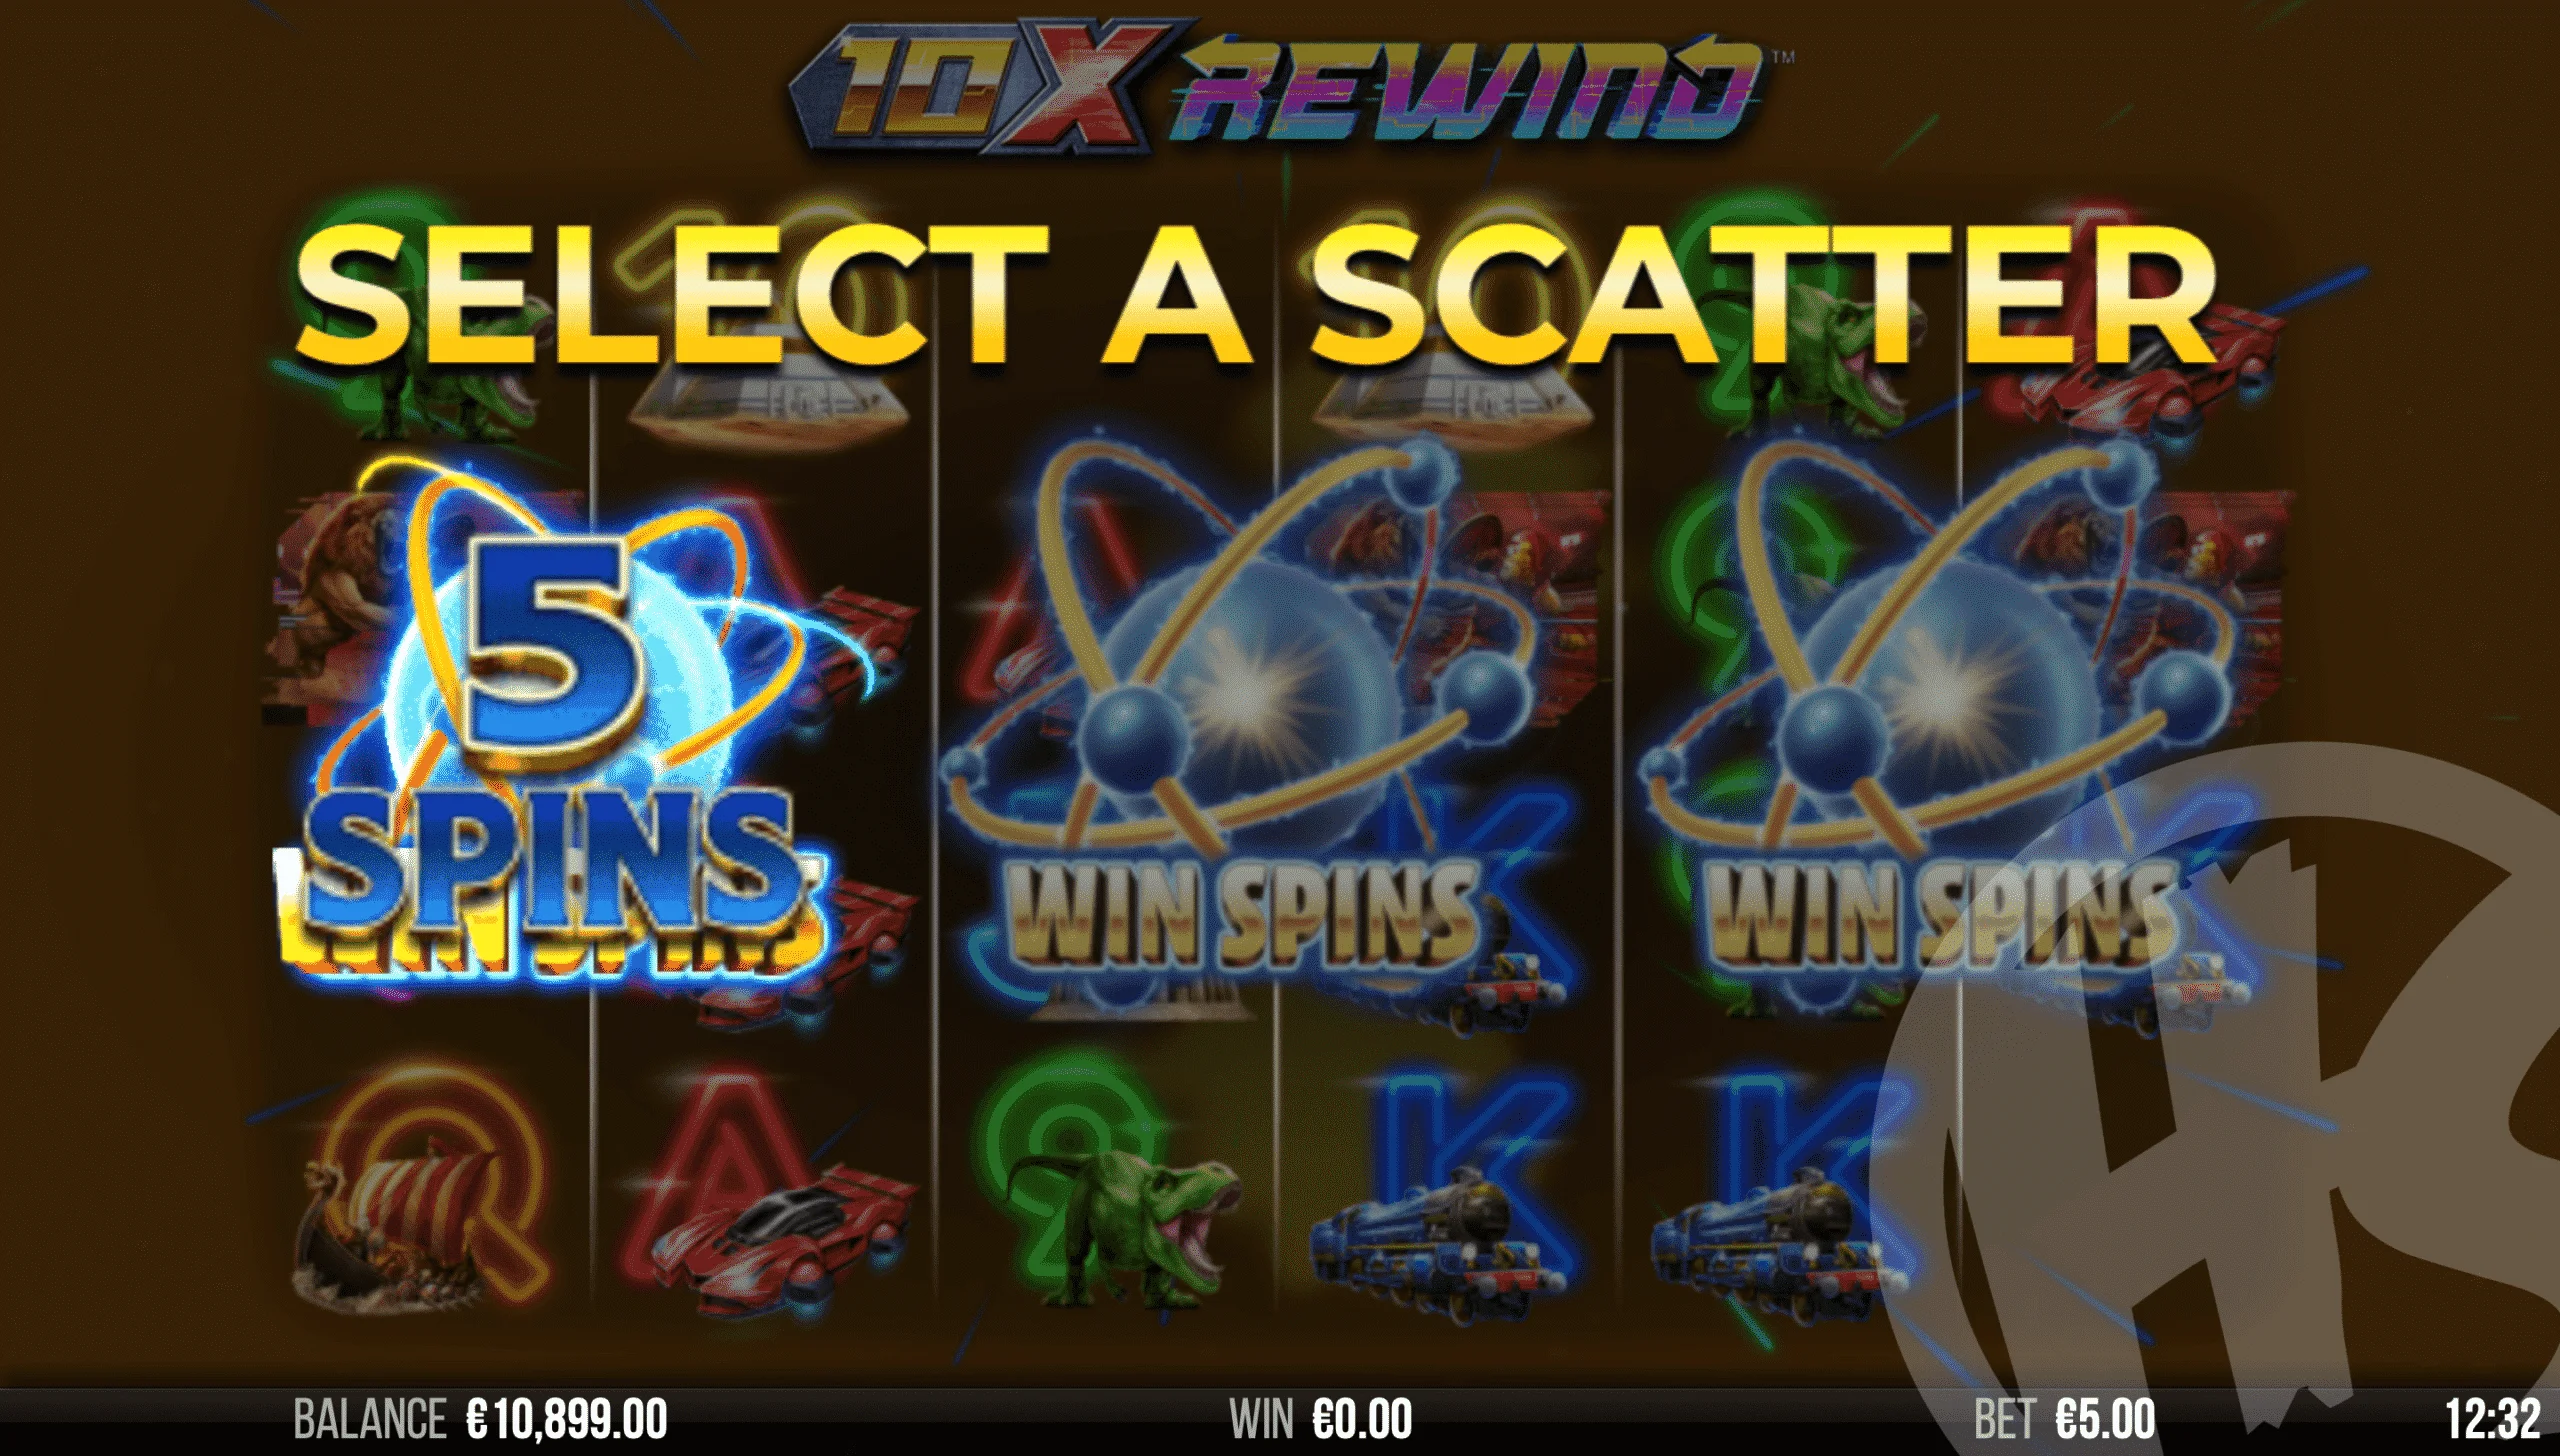 3 Atom Scatters Awards 5, 7 or 10 Win Spins